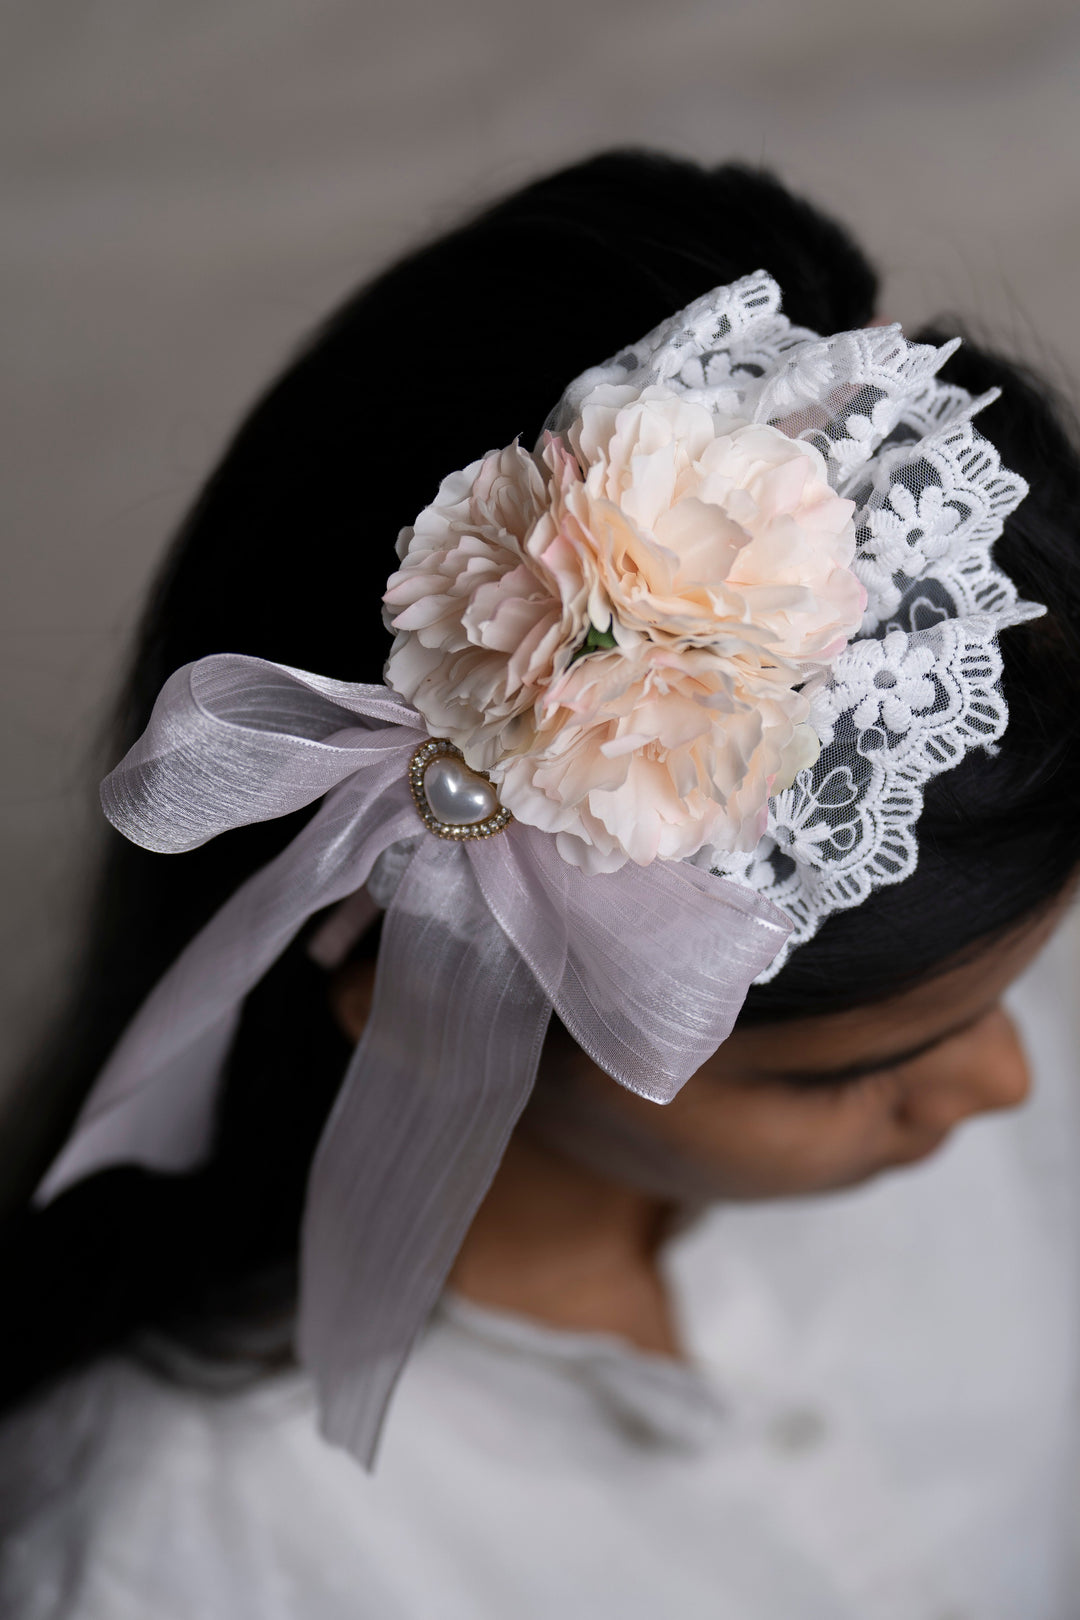 The Nesavu Hair Band Elegant Peony and Lace Hair Accessory with Pearl Detail Nesavu Pink JHB83C Peony Lace Hair Accessory with Pearl Detail | Luxurious Floral Hairpiece | The Nesavu